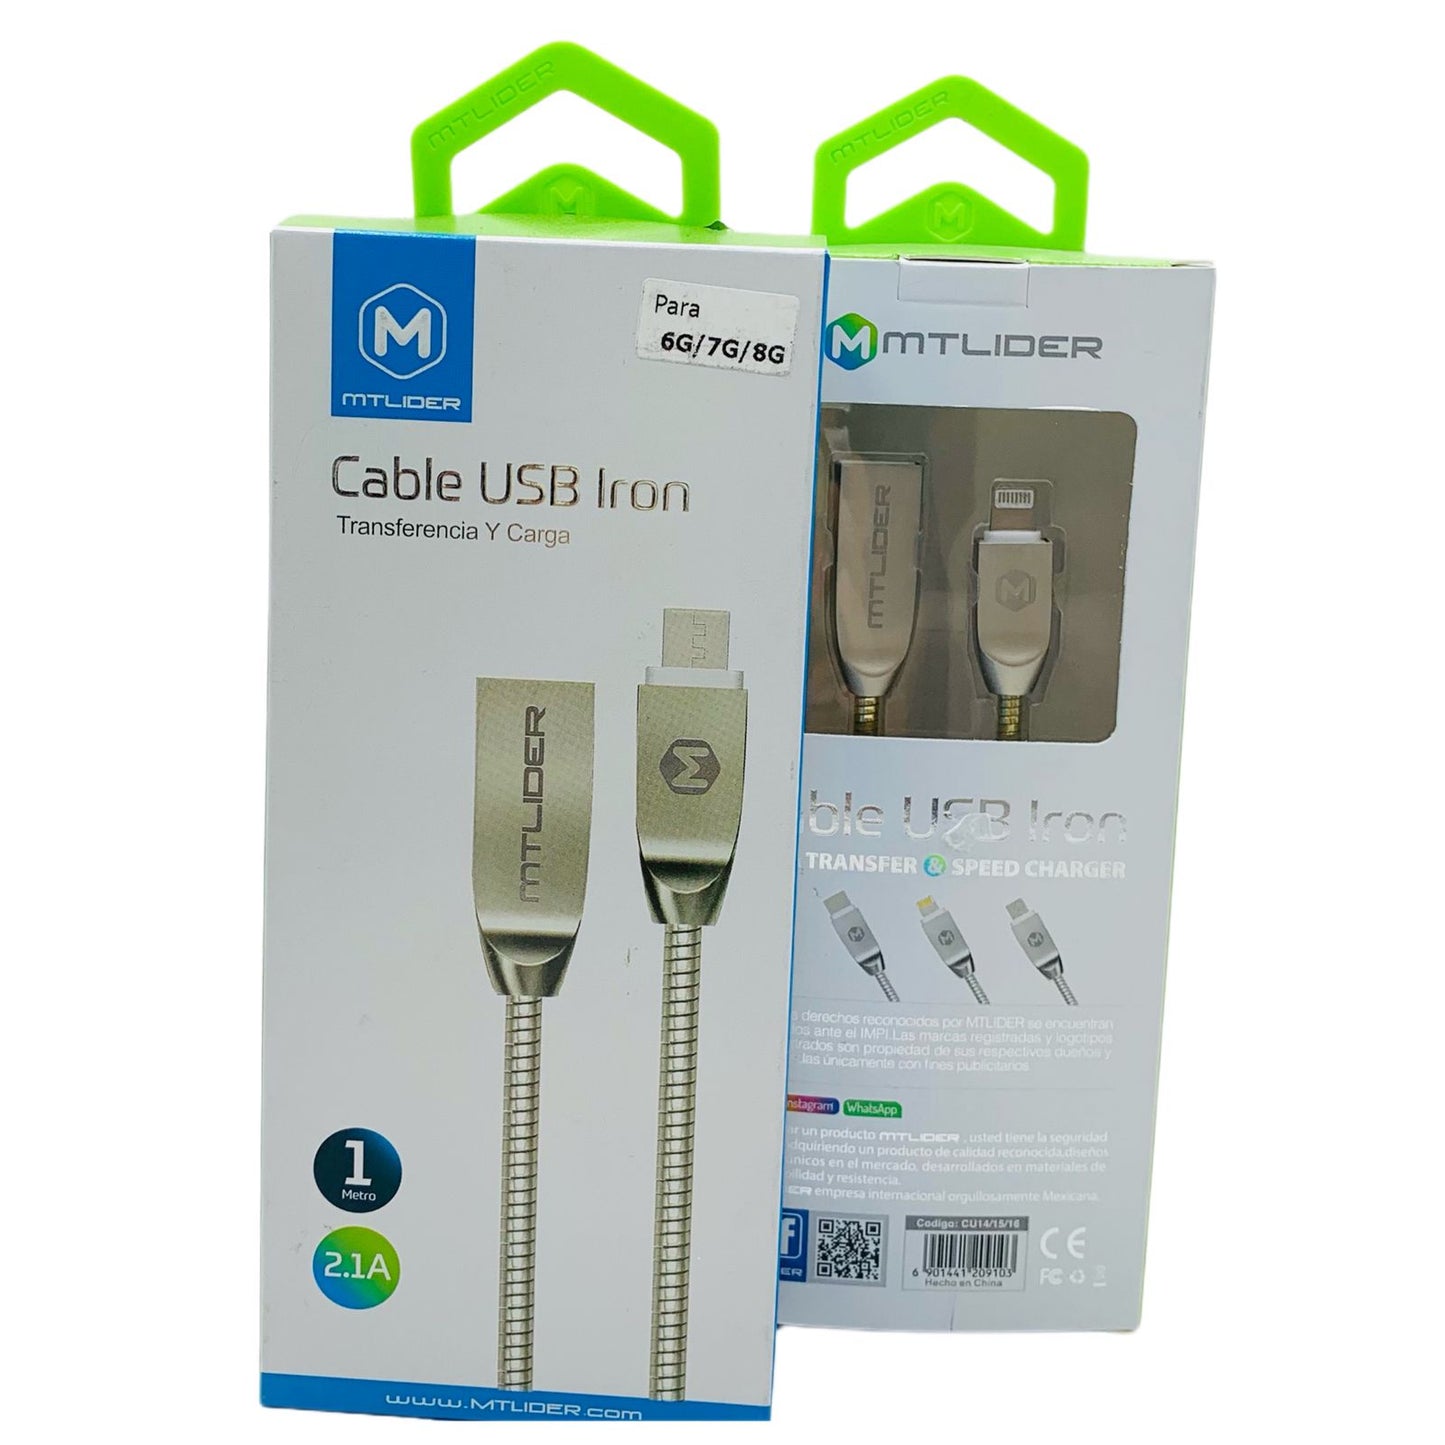 MTLIDER CABLE IPHONE IRON 1M